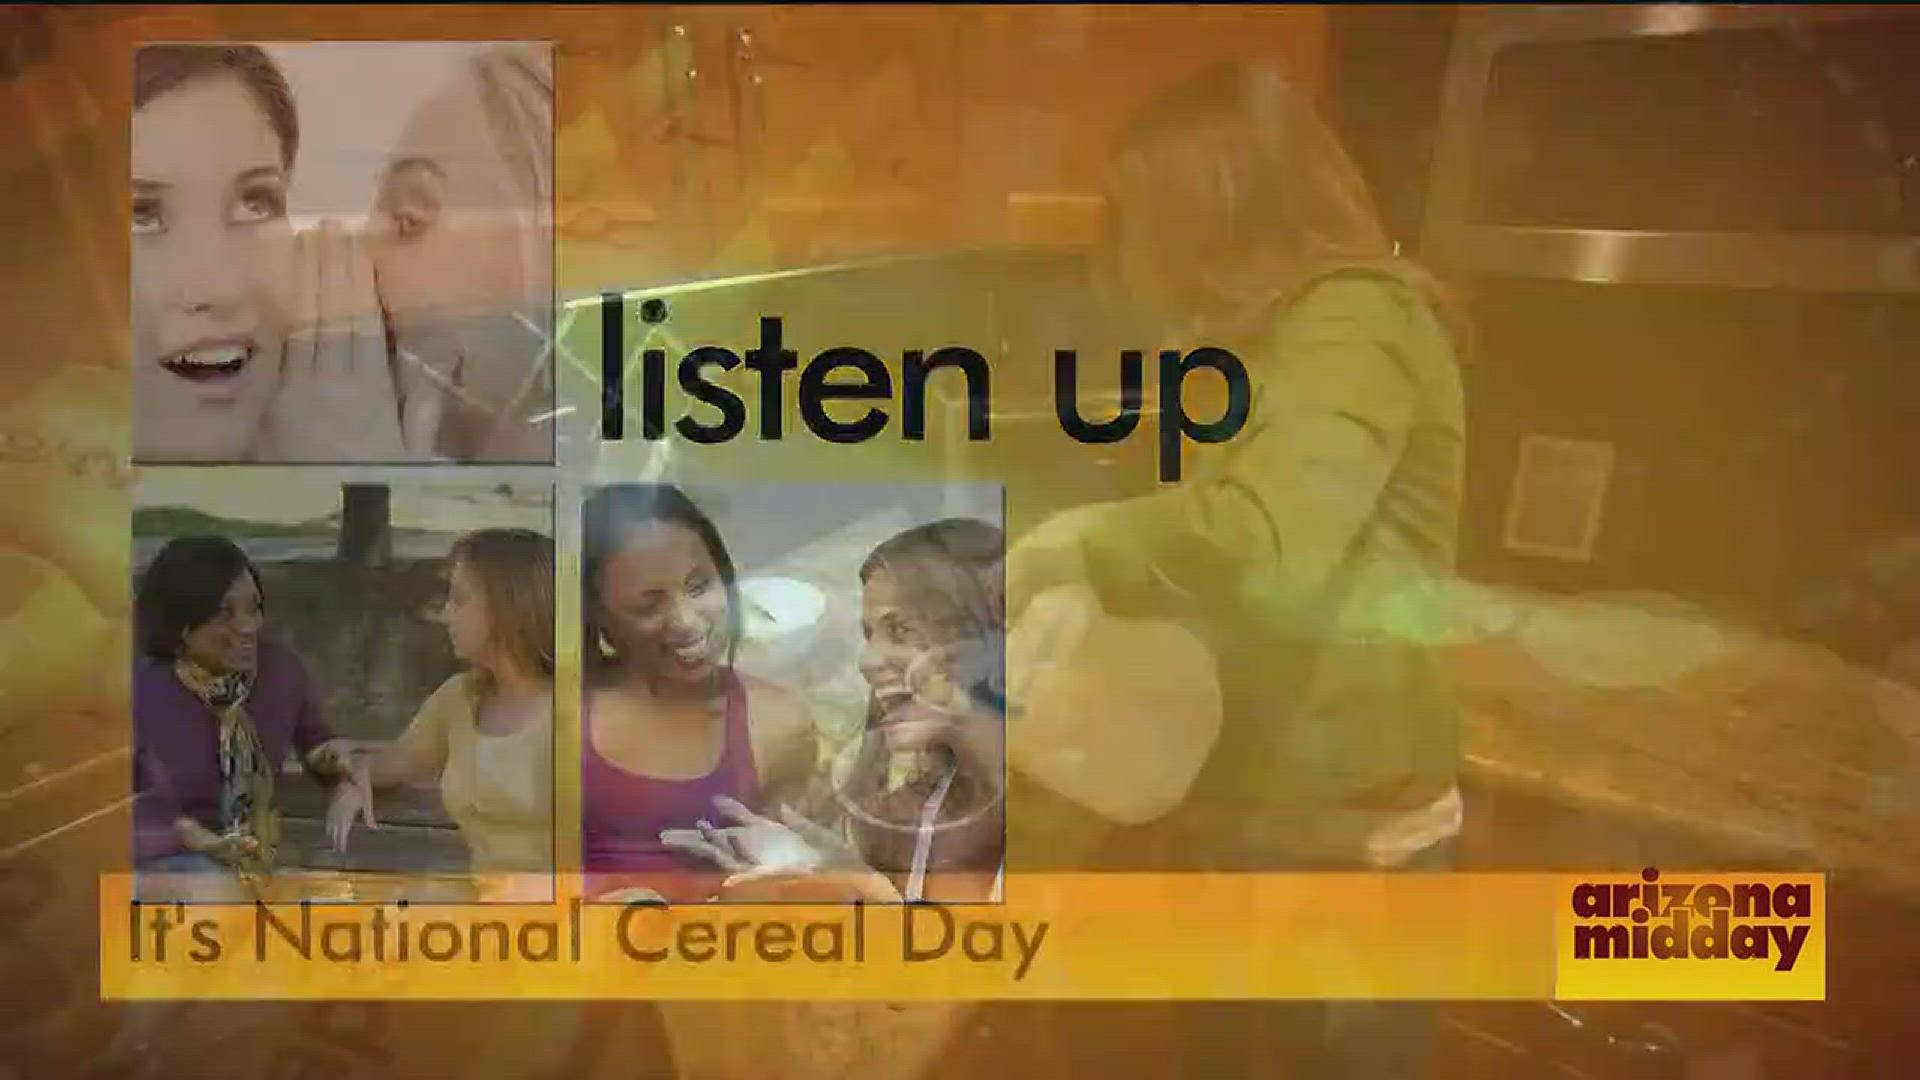 Limor Suss offers some healthy cereal options and alternatives for breakfast.